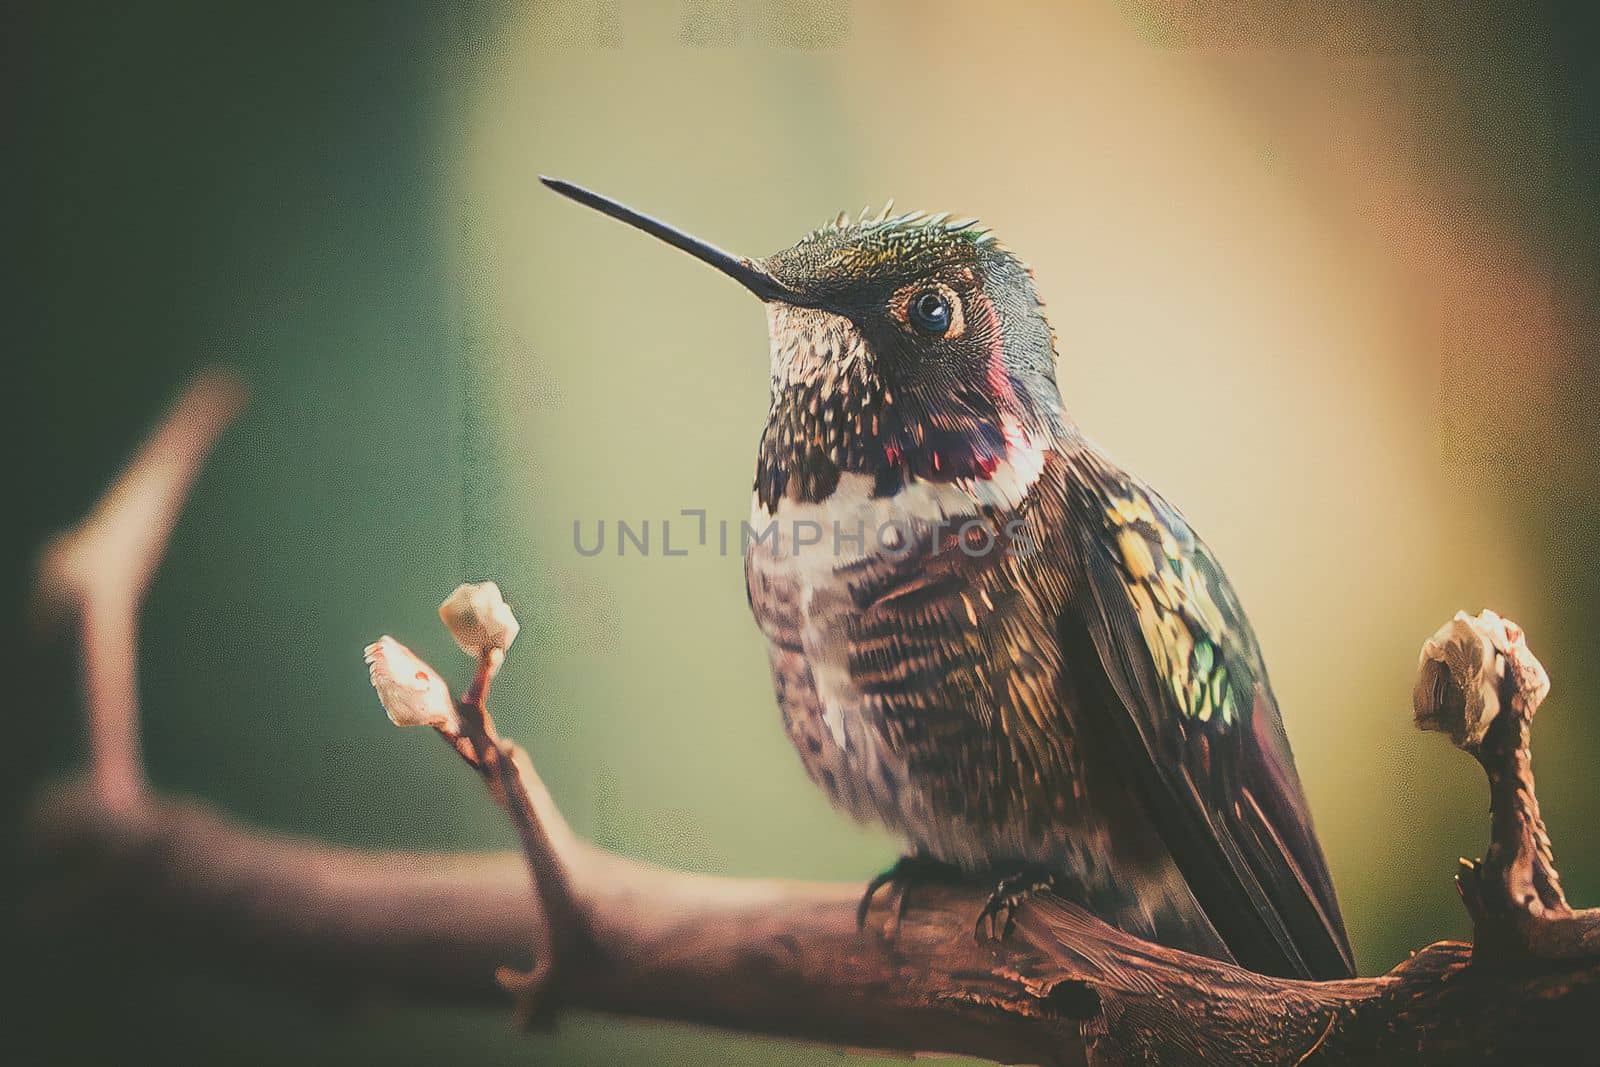 Intimate shot of a hummingbird perched on a tree branch, dim background puts the focus on the bird. by FokasuArt